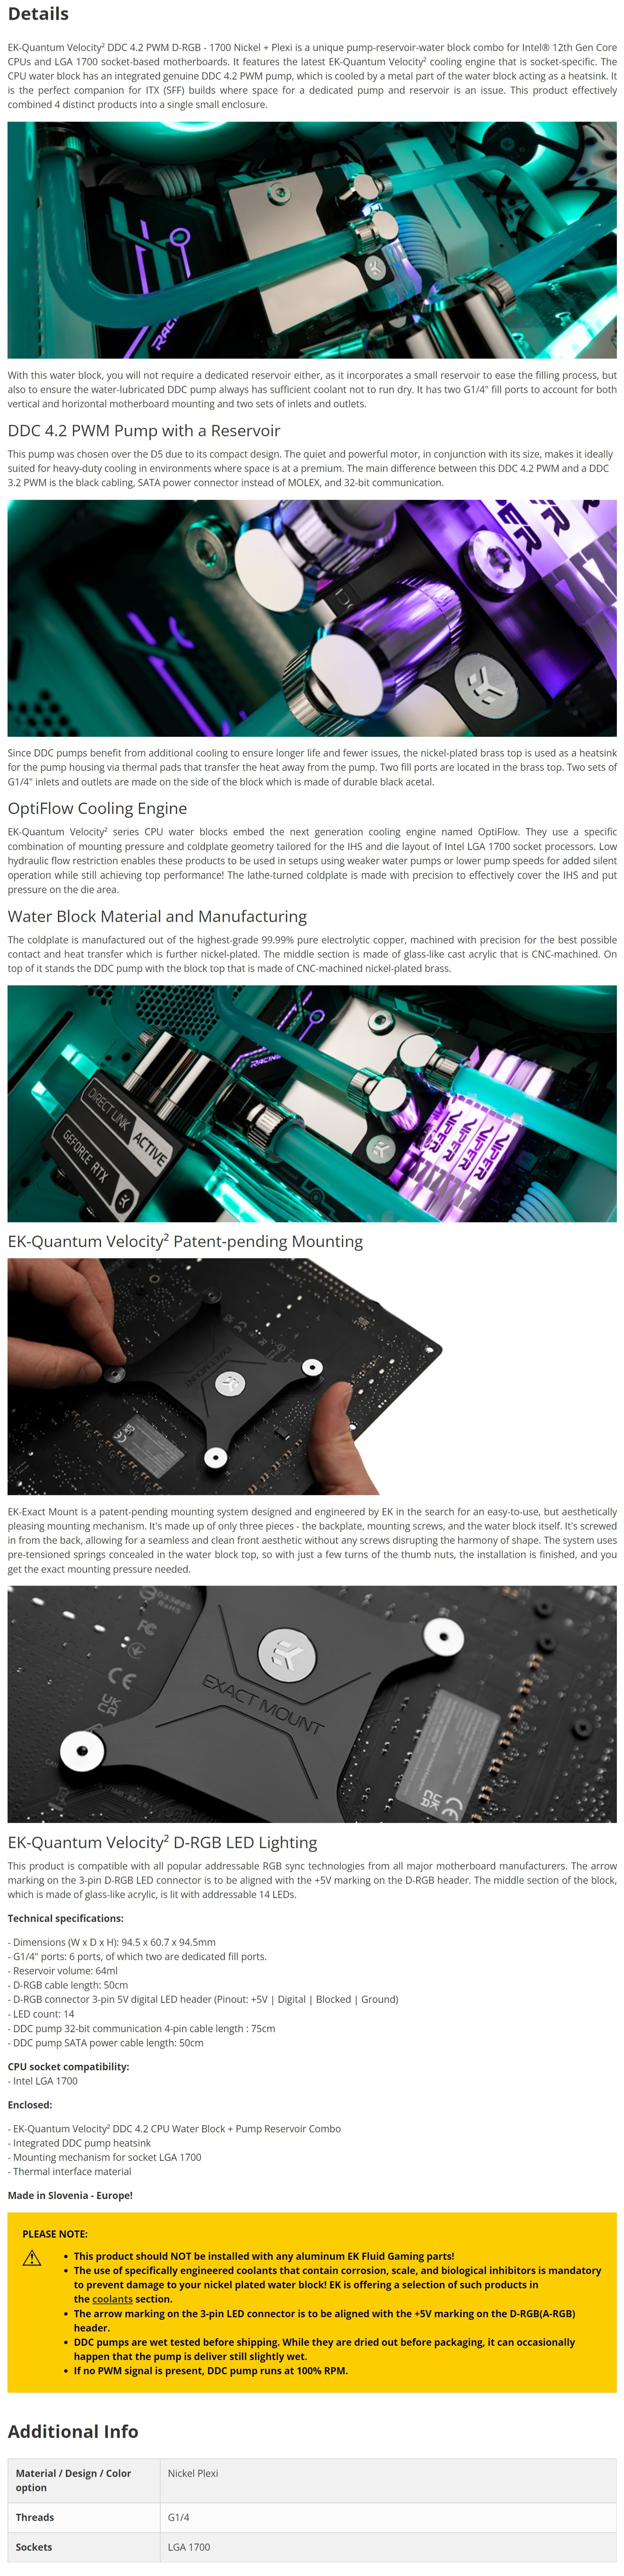 A large marketing image providing additional information about the product EK Quantum Velocity2 DDC 4.2 PWM D-RGB 1700 CPU Waterblock - Nickel+Plexi - Additional alt info not provided